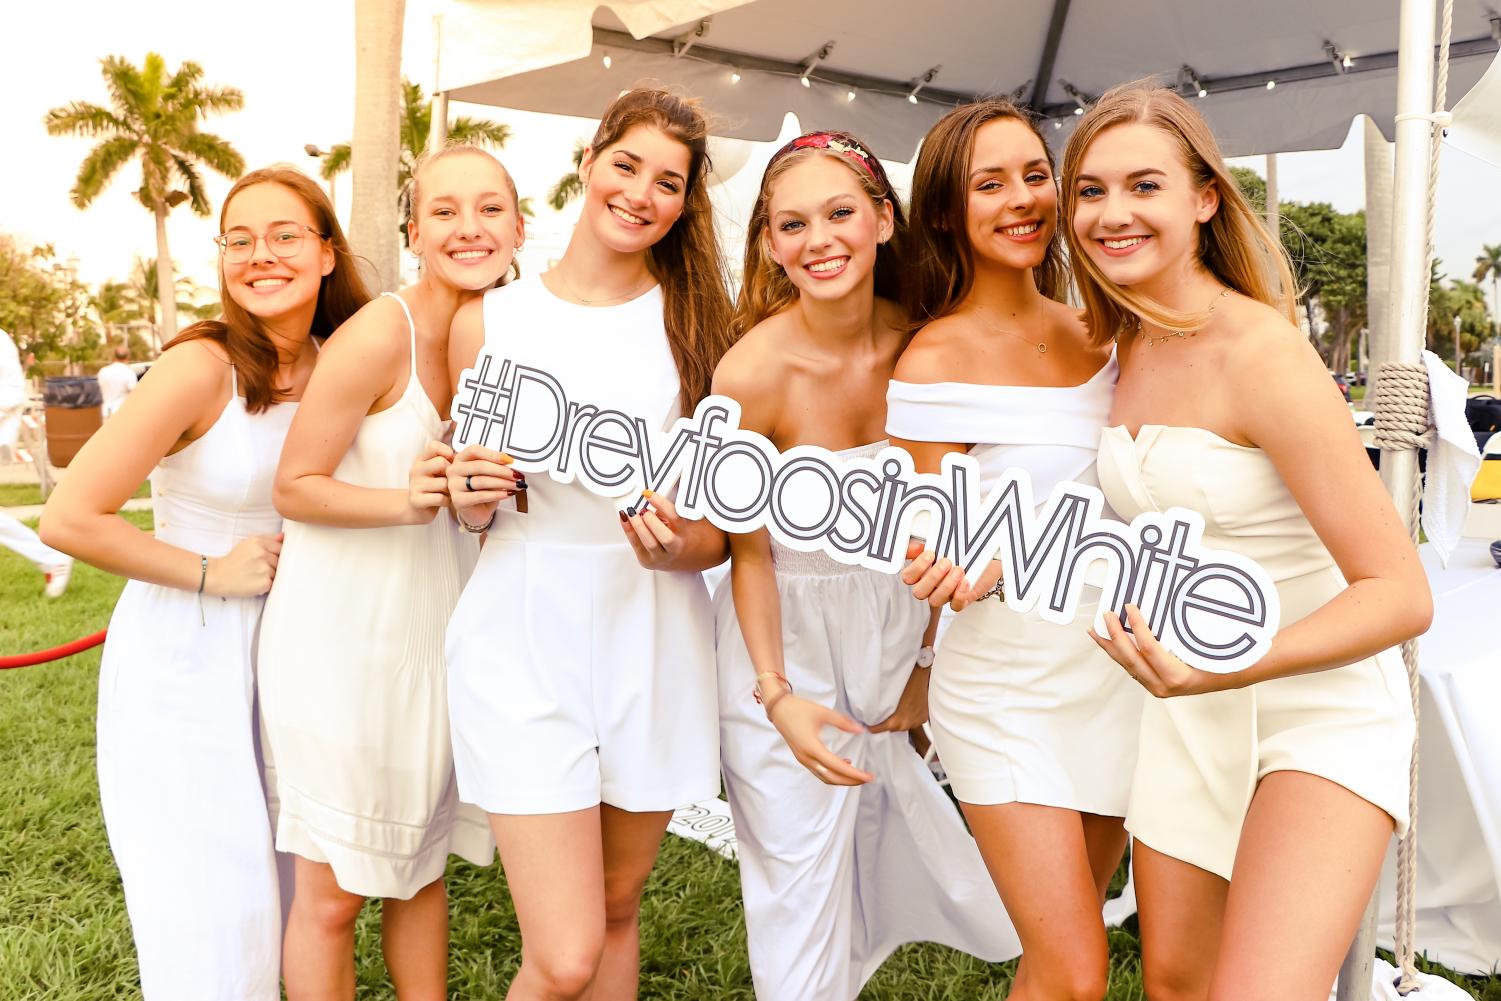 ANNUAL+DREYFOOS+IN+WHITE+EVENT+IS+HELD+AT+ORIGINAL+PERFORMING+ARTS+CENTER